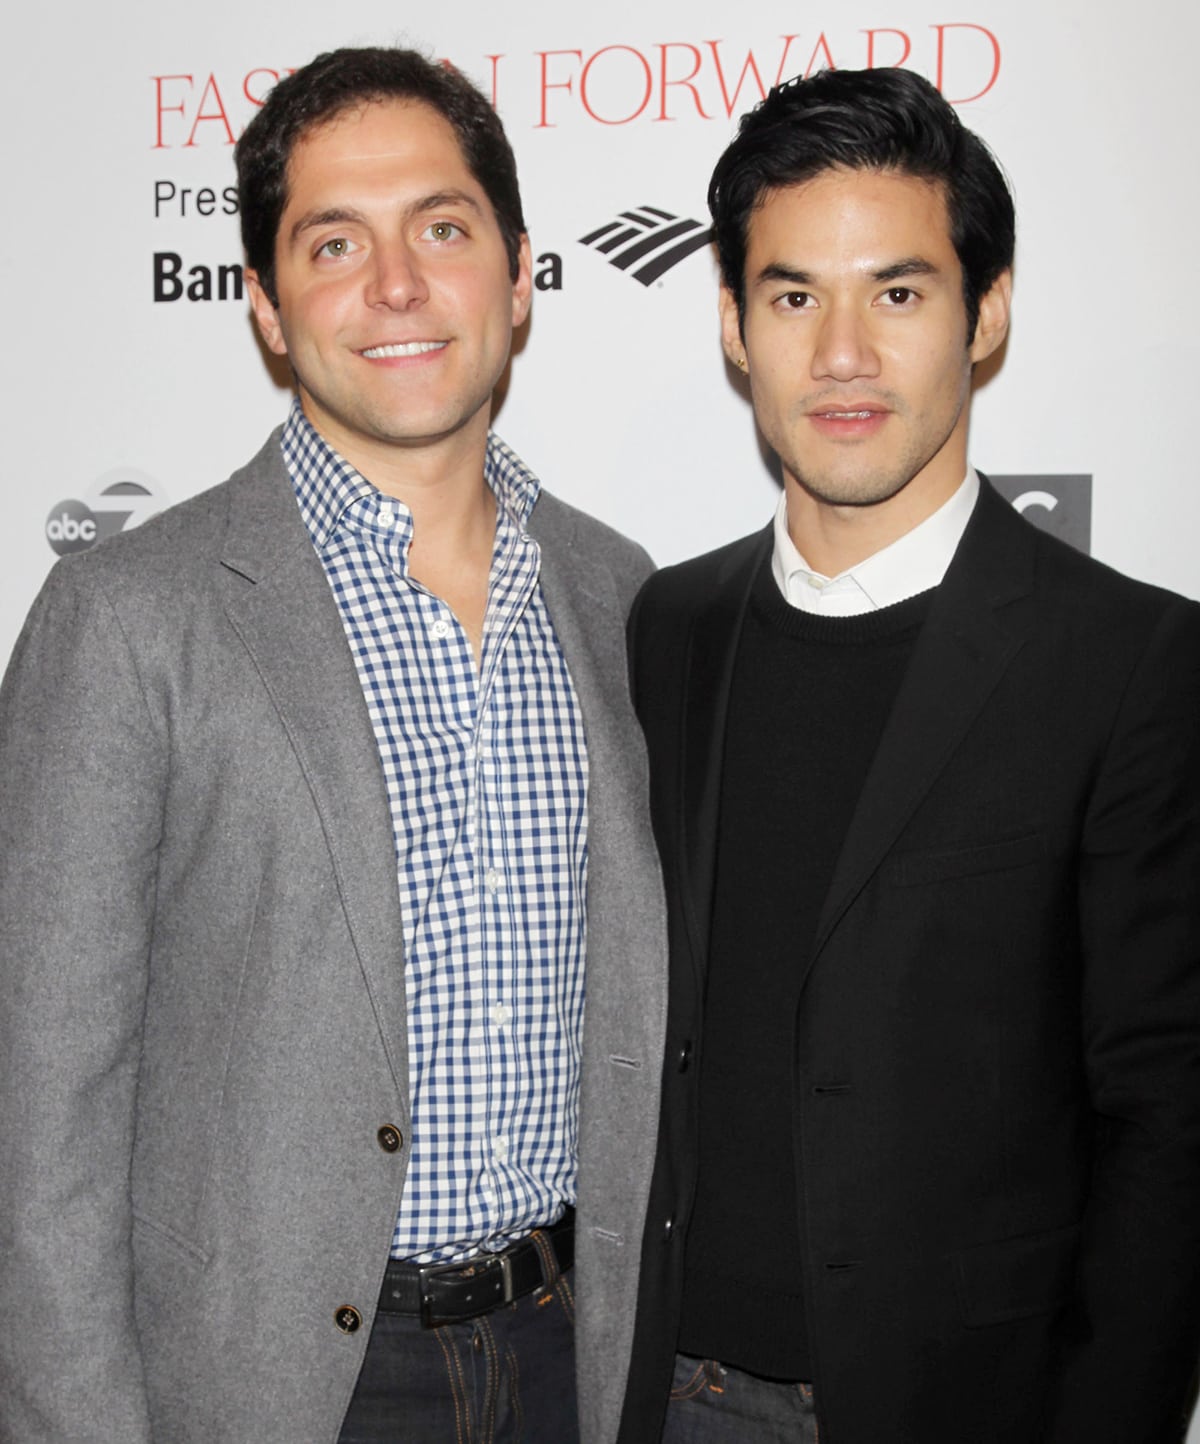 Seth Weissman and Joseph Altuzarra tied the knot in the Rainbow Room at the Rockefeller Center in 2019